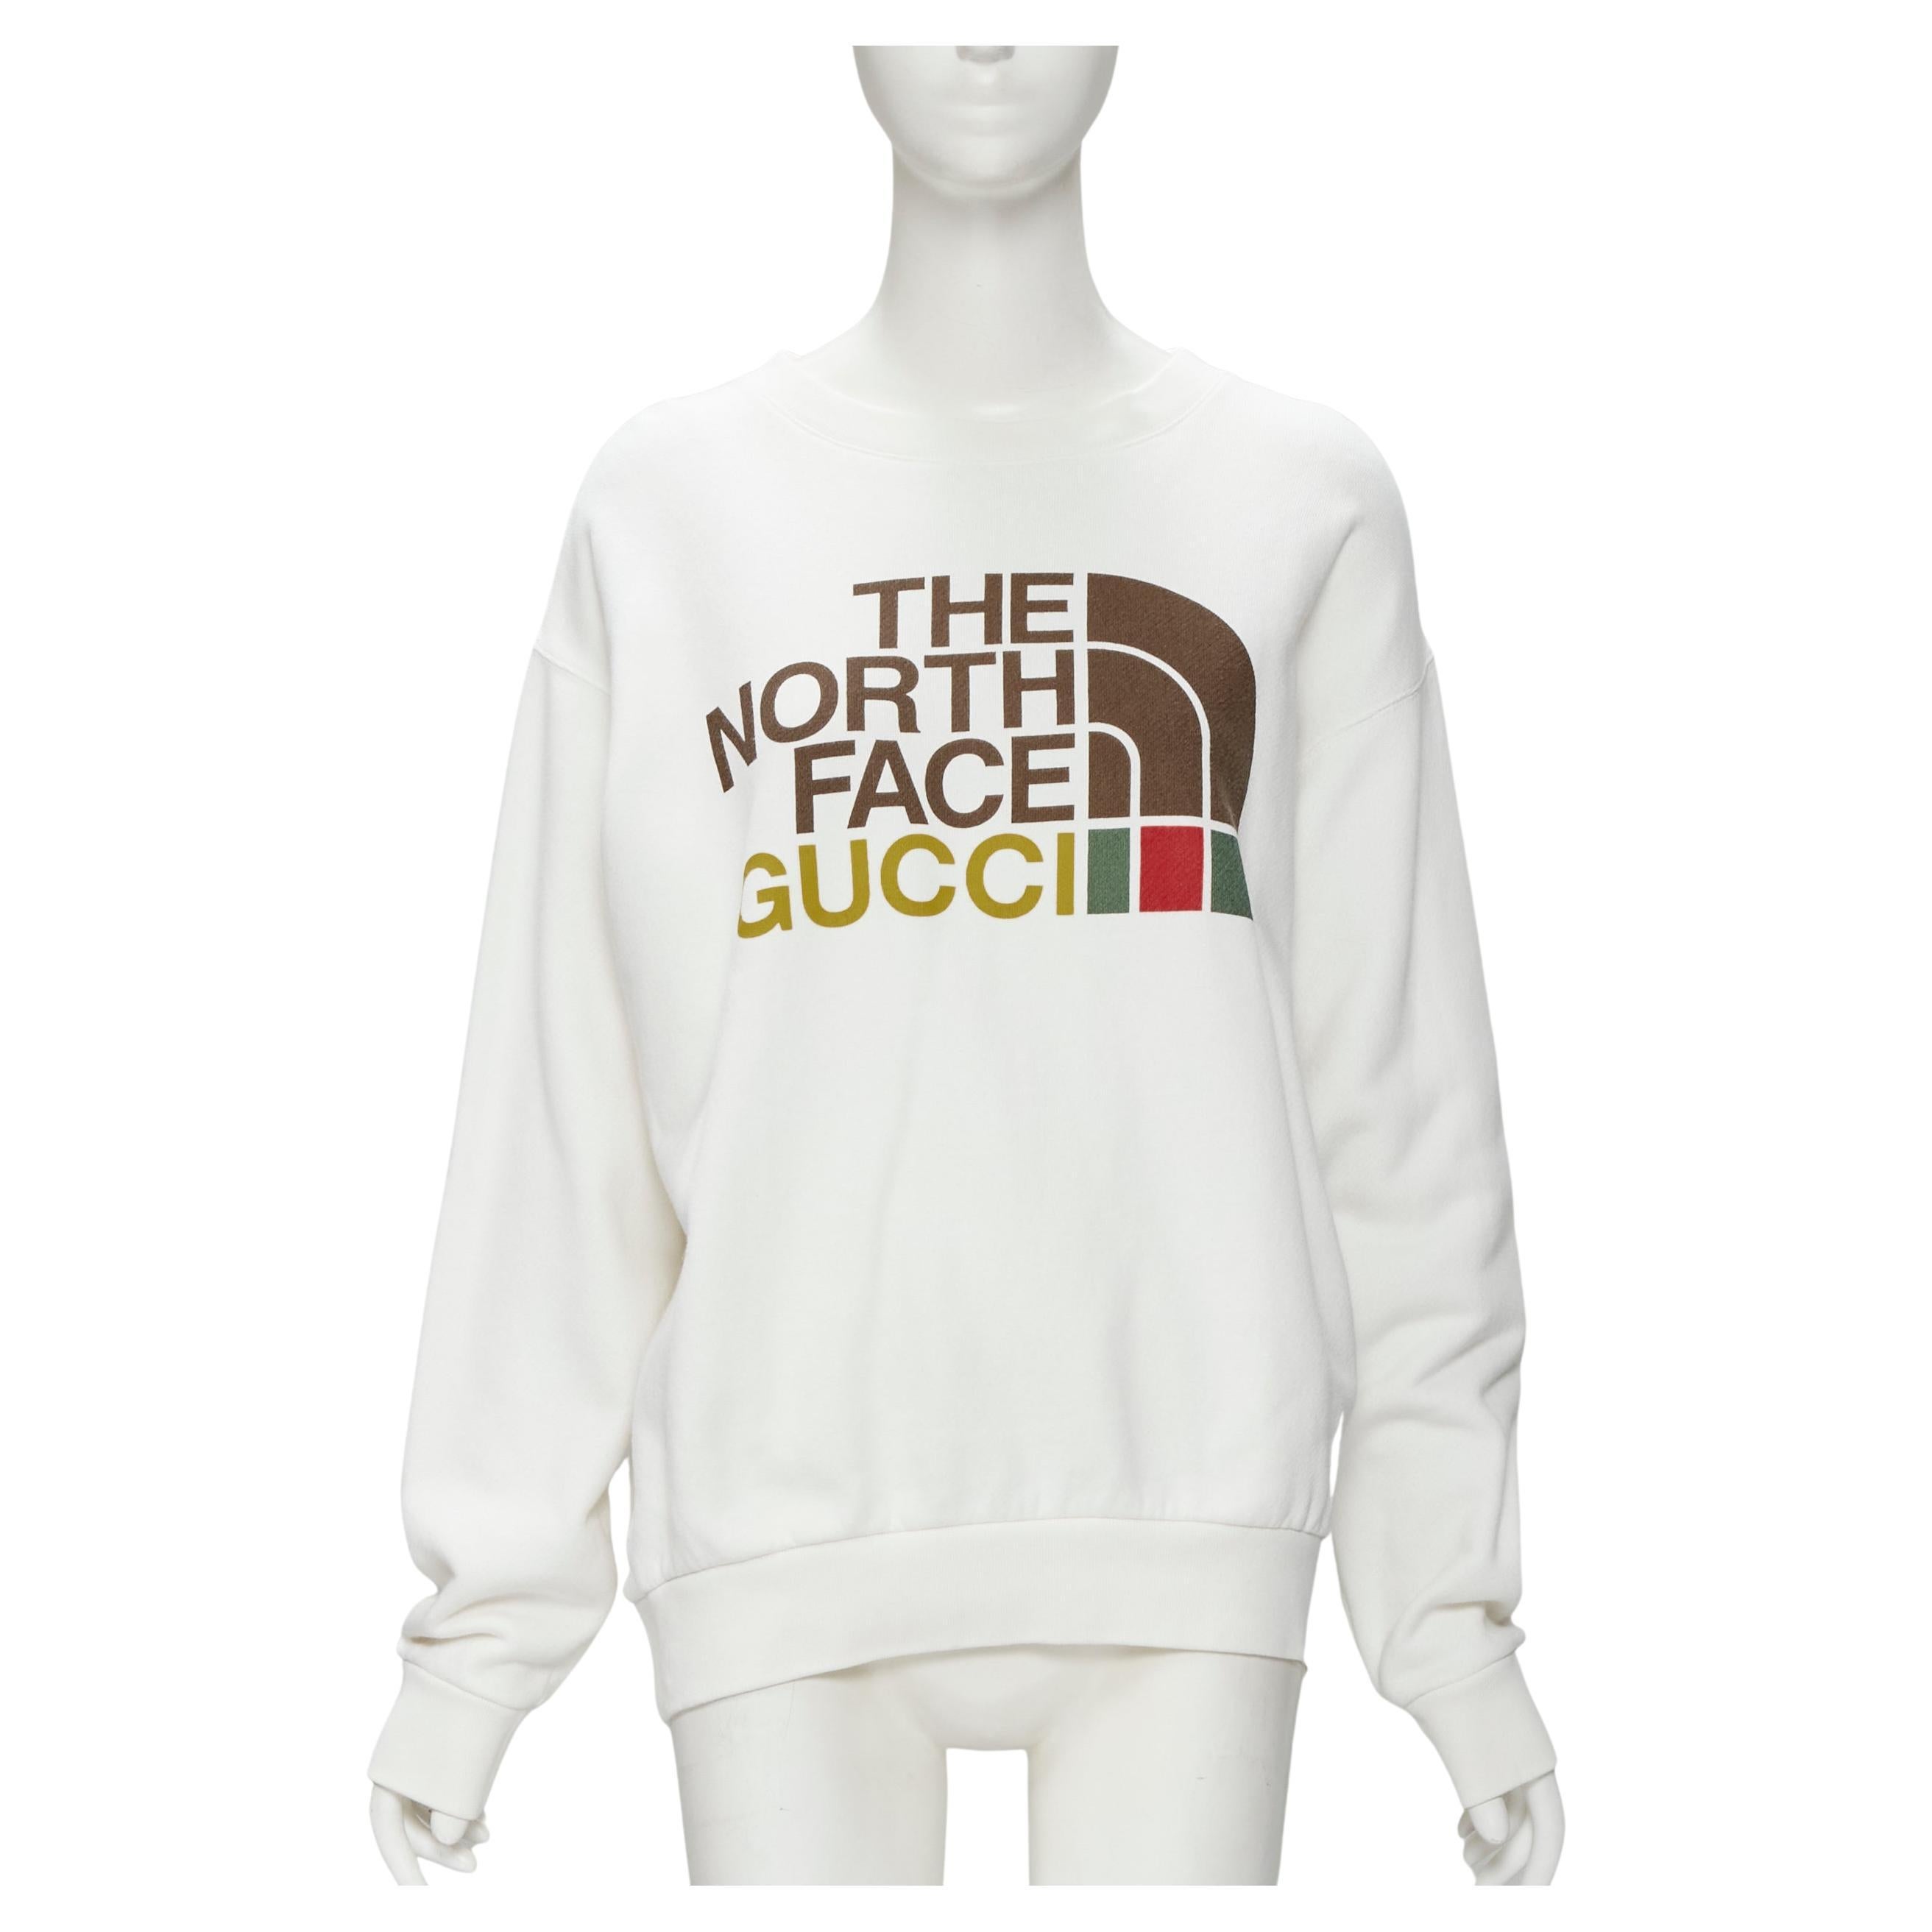 GUCCI THE NORTH FACE logo print white cotton oversized sweatshirt pullover XS For Sale